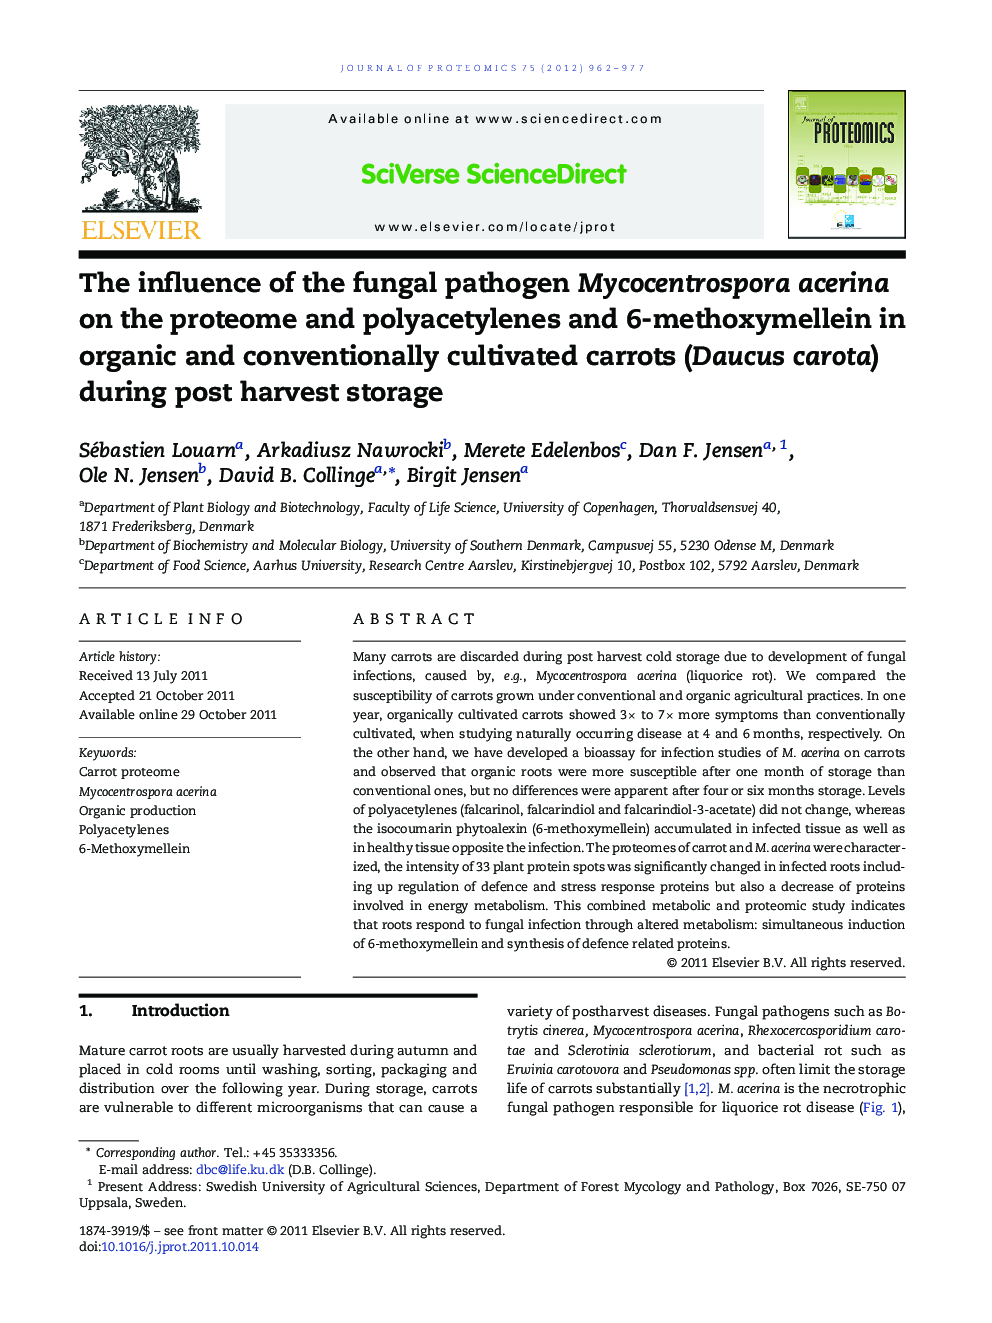 The influence of the fungal pathogen Mycocentrospora acerina on the proteome and polyacetylenes and 6-methoxymellein in organic and conventionally cultivated carrots (Daucus carota) during post harvest storage